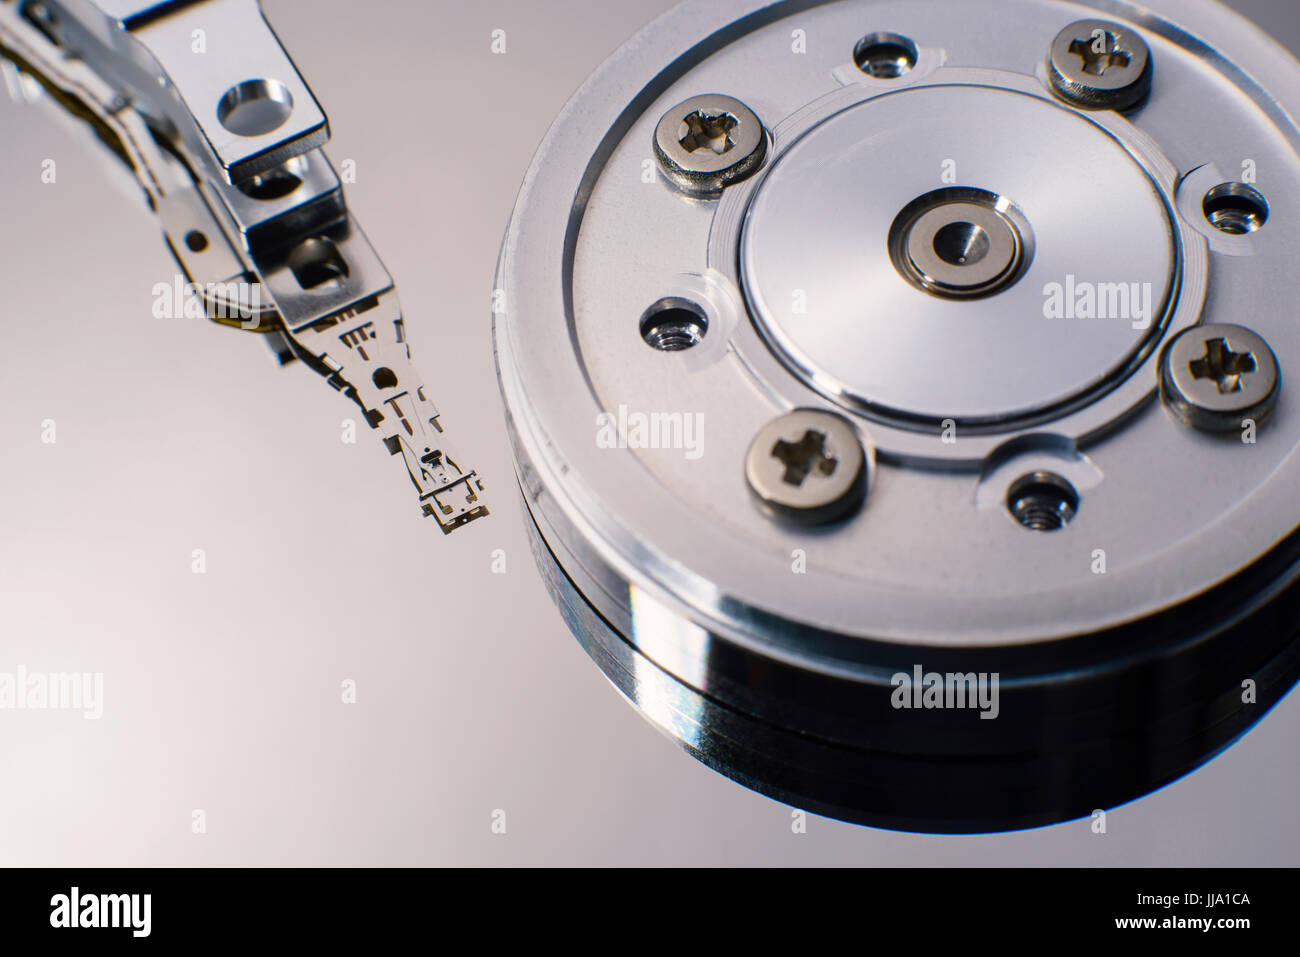 part of a open harddisk Stock Photo